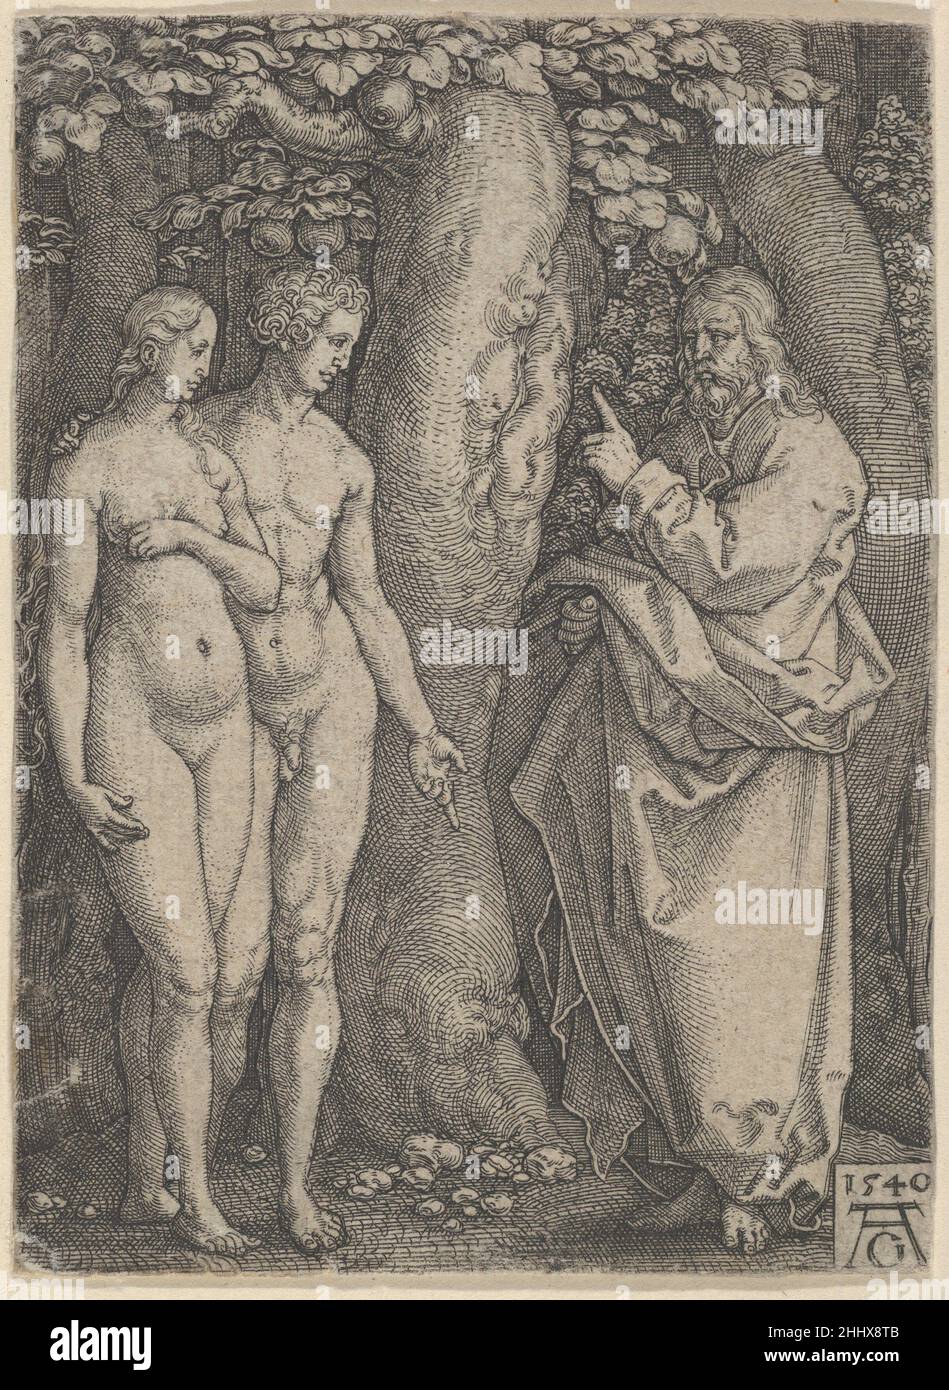 God Forbidding Adam and Eve to Eat from the Tree of Knowledge, from The Story of Adam and Eve 1540 Heinrich Aldegrever German God, at right, addresses Adam and Eve, who stand together at left. Based on Genesis 2:16-17. Plate 2 from a series of six engravings.. God Forbidding Adam and Eve to Eat from the Tree of Knowledge, from The Story of Adam and Eve  428302 Stock Photo